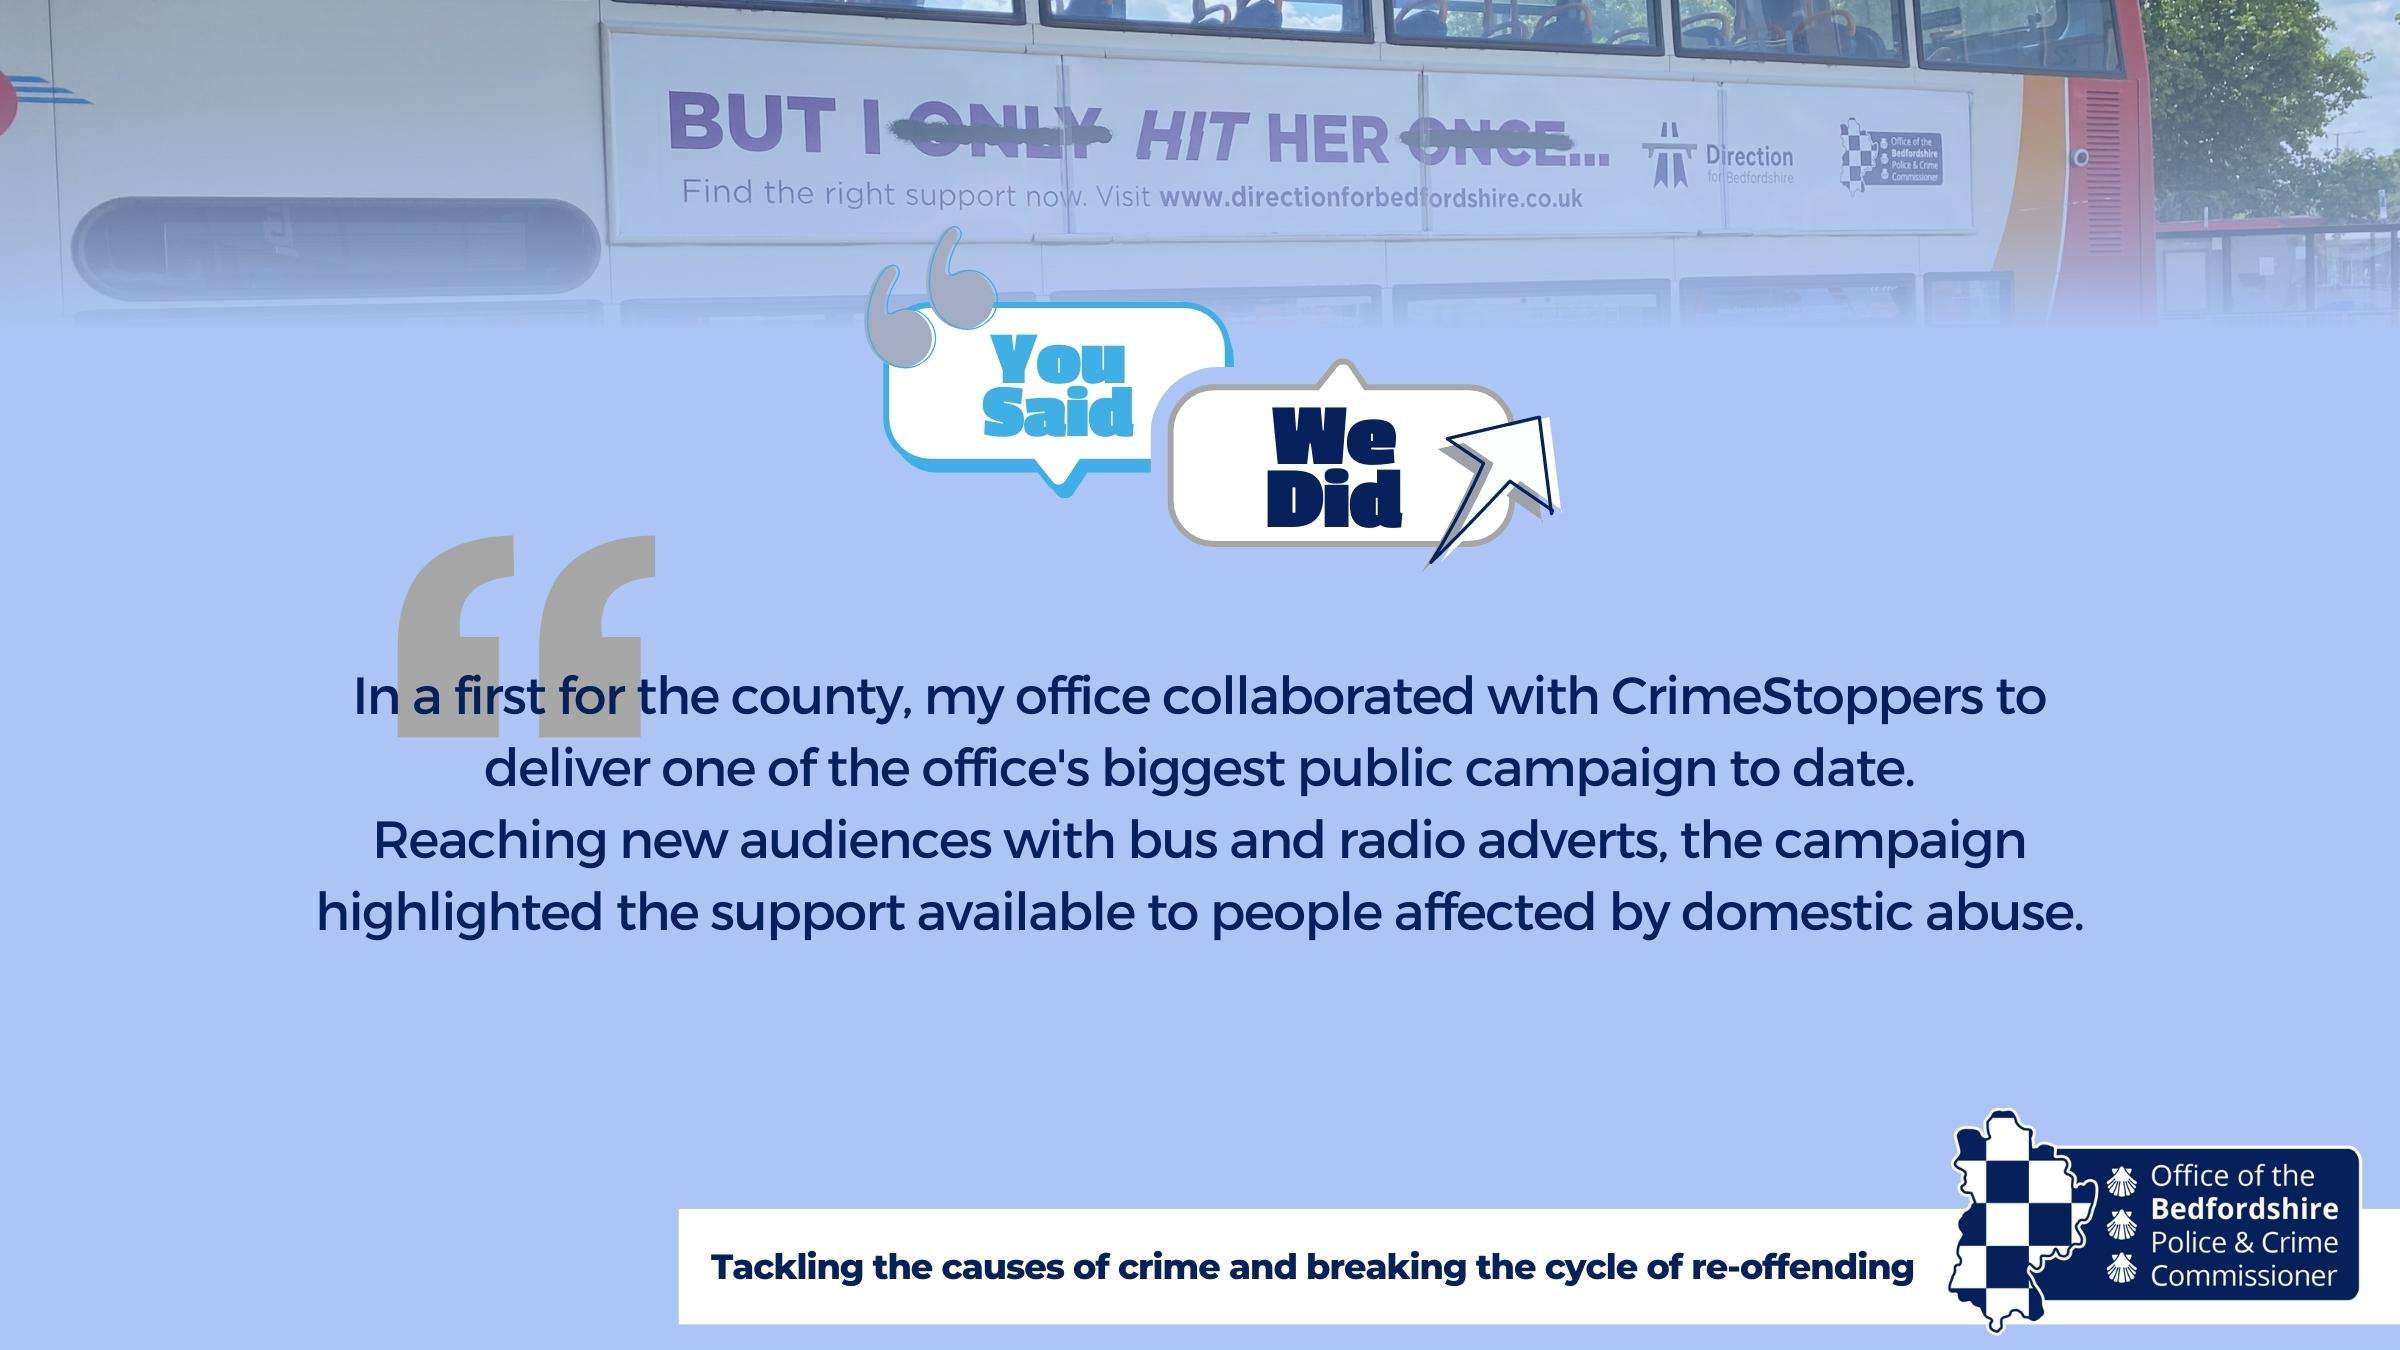 Priority 3, Tackling the causes of crime and breaking the cycle